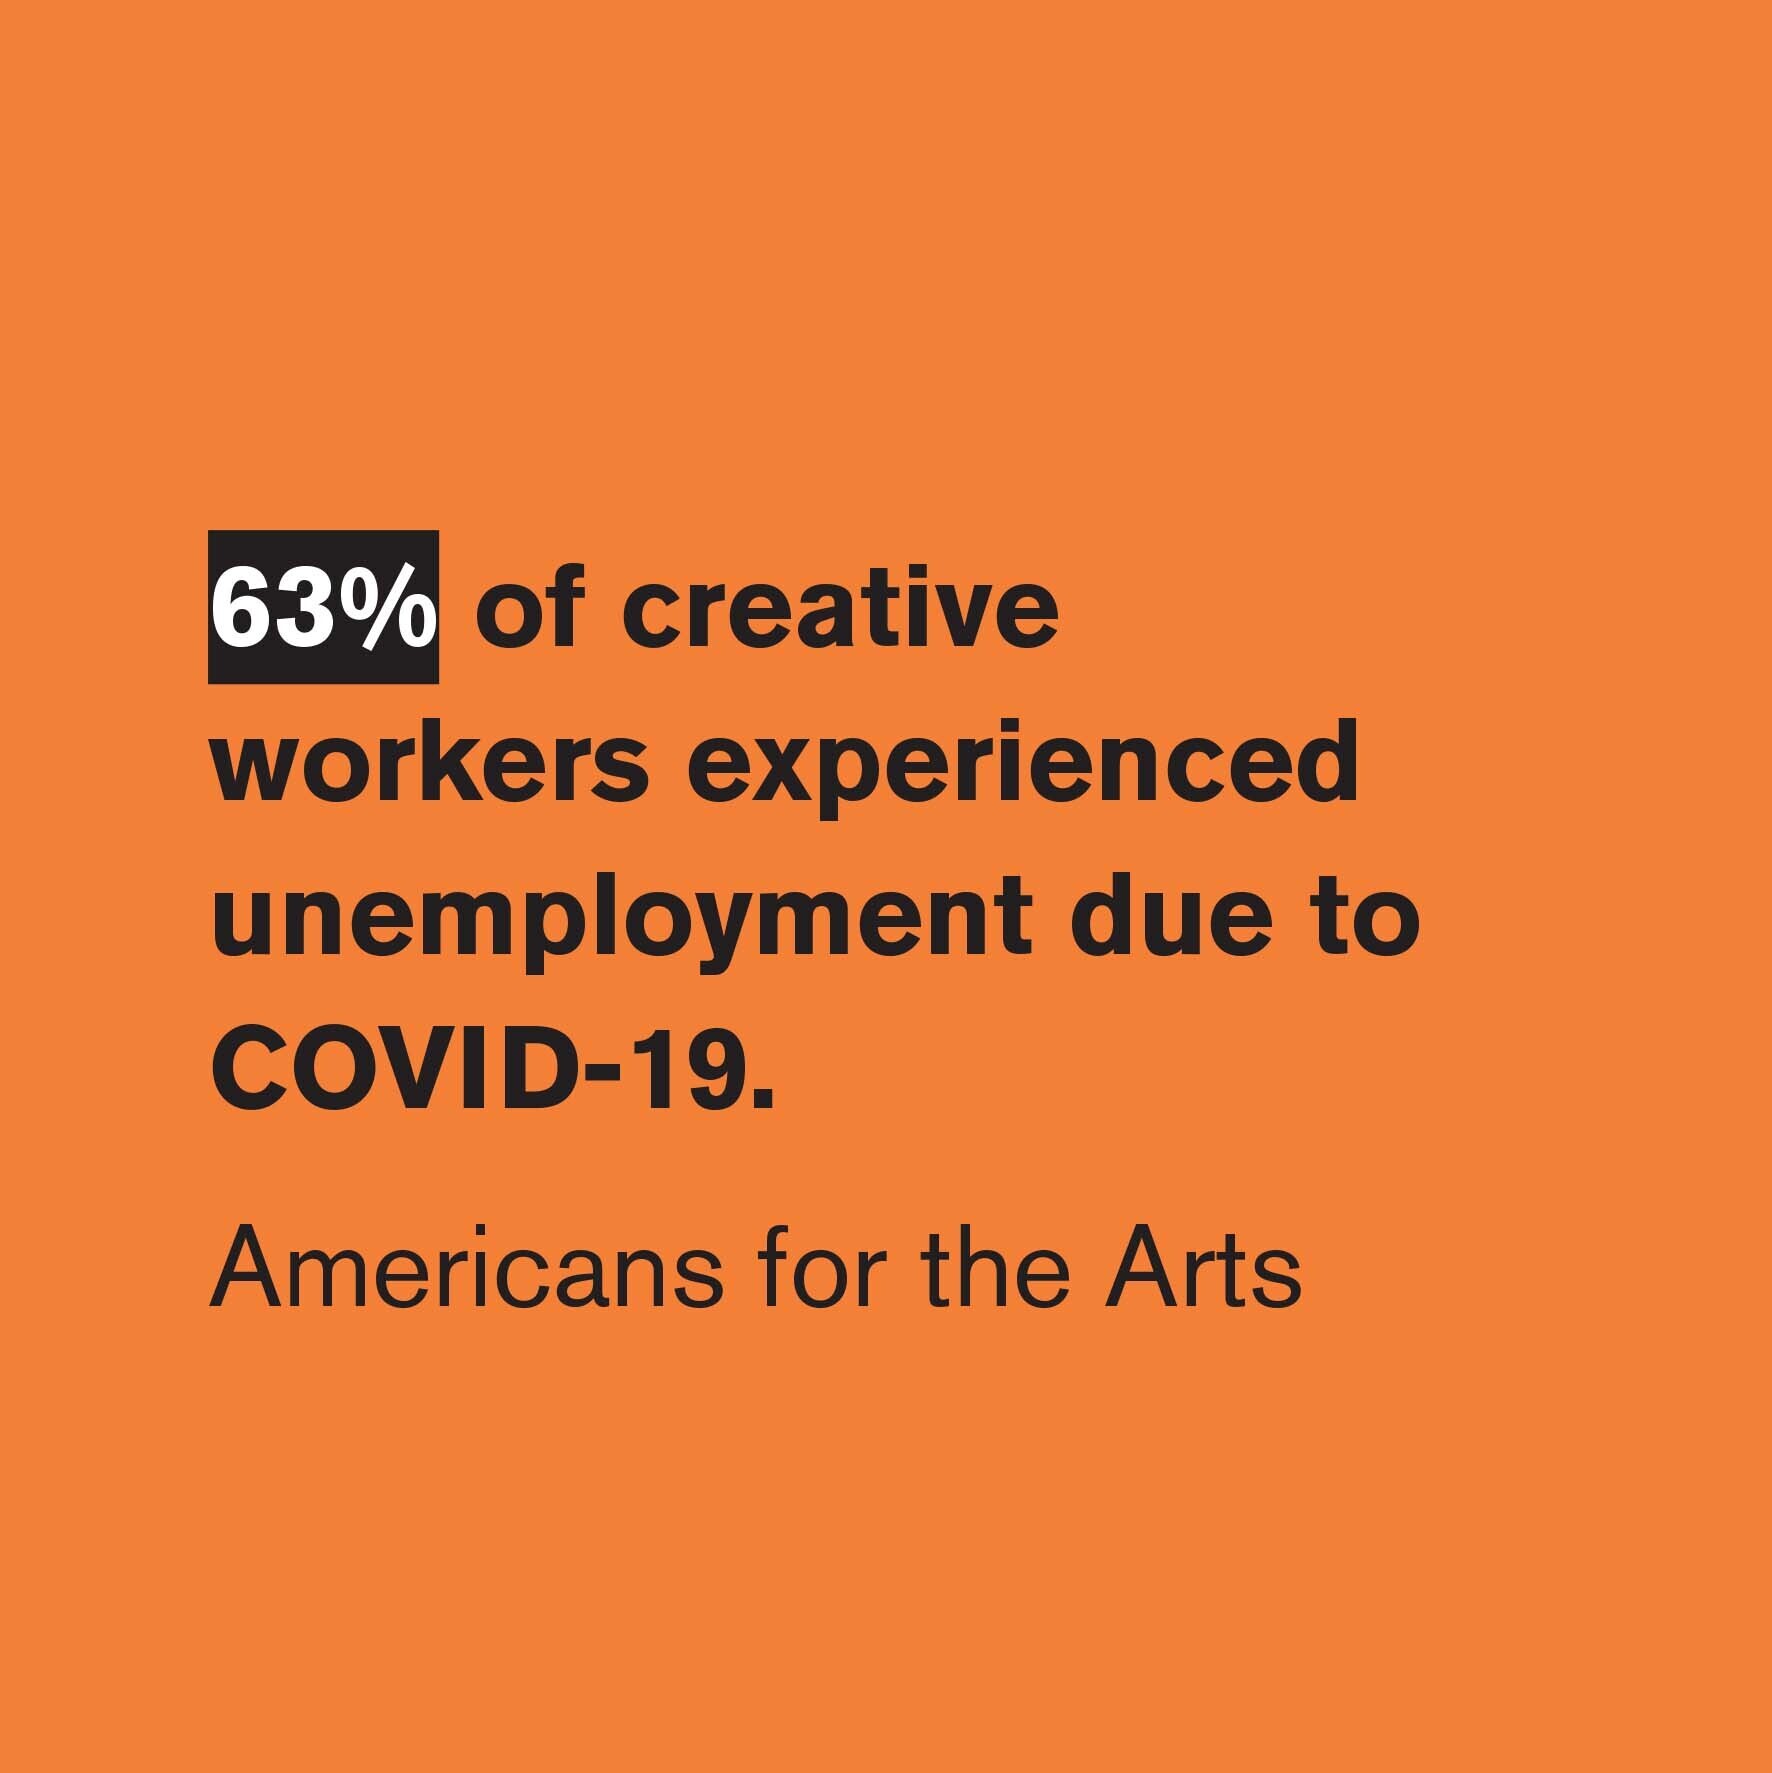 63% experienced unemployment due to COVID19 (Americans for the Arts)